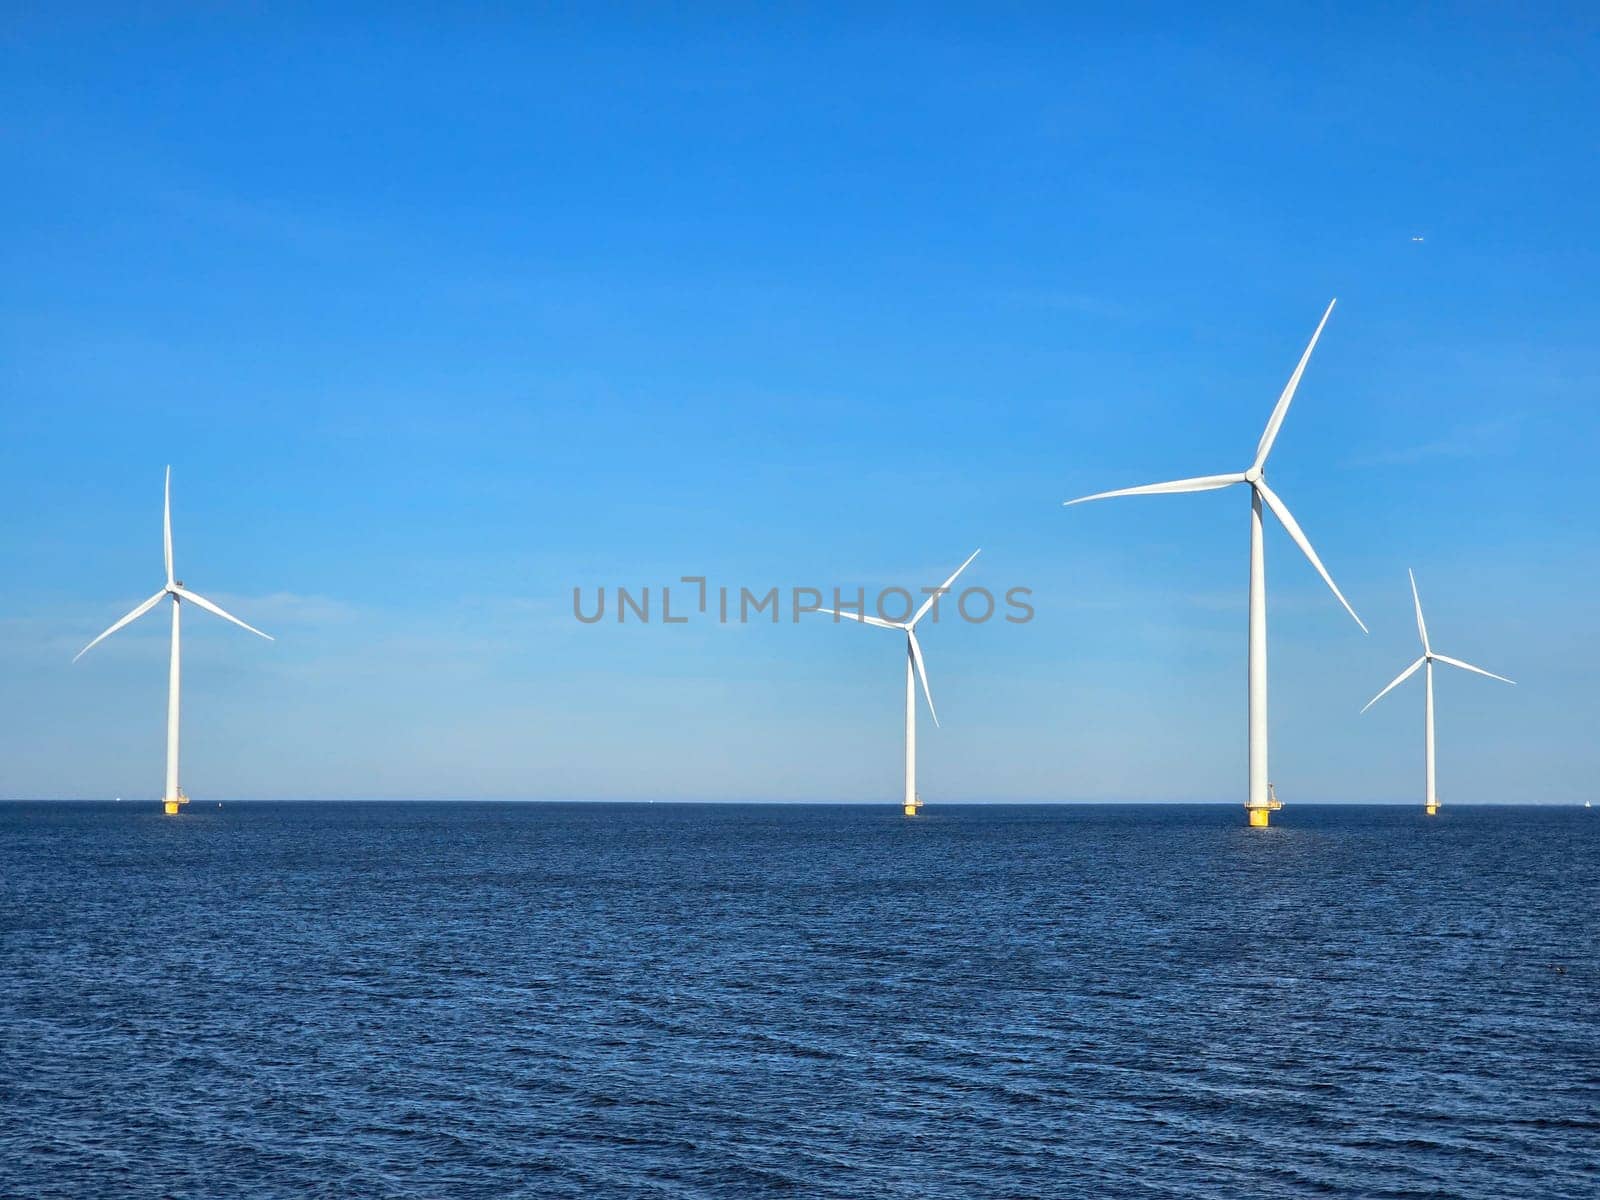 windmill turbines in the ocean generate green energy electrically, and windmills isolated at sea in the Netherlands. Energy transition, zero emissions, carbon neutral, Earth day concept